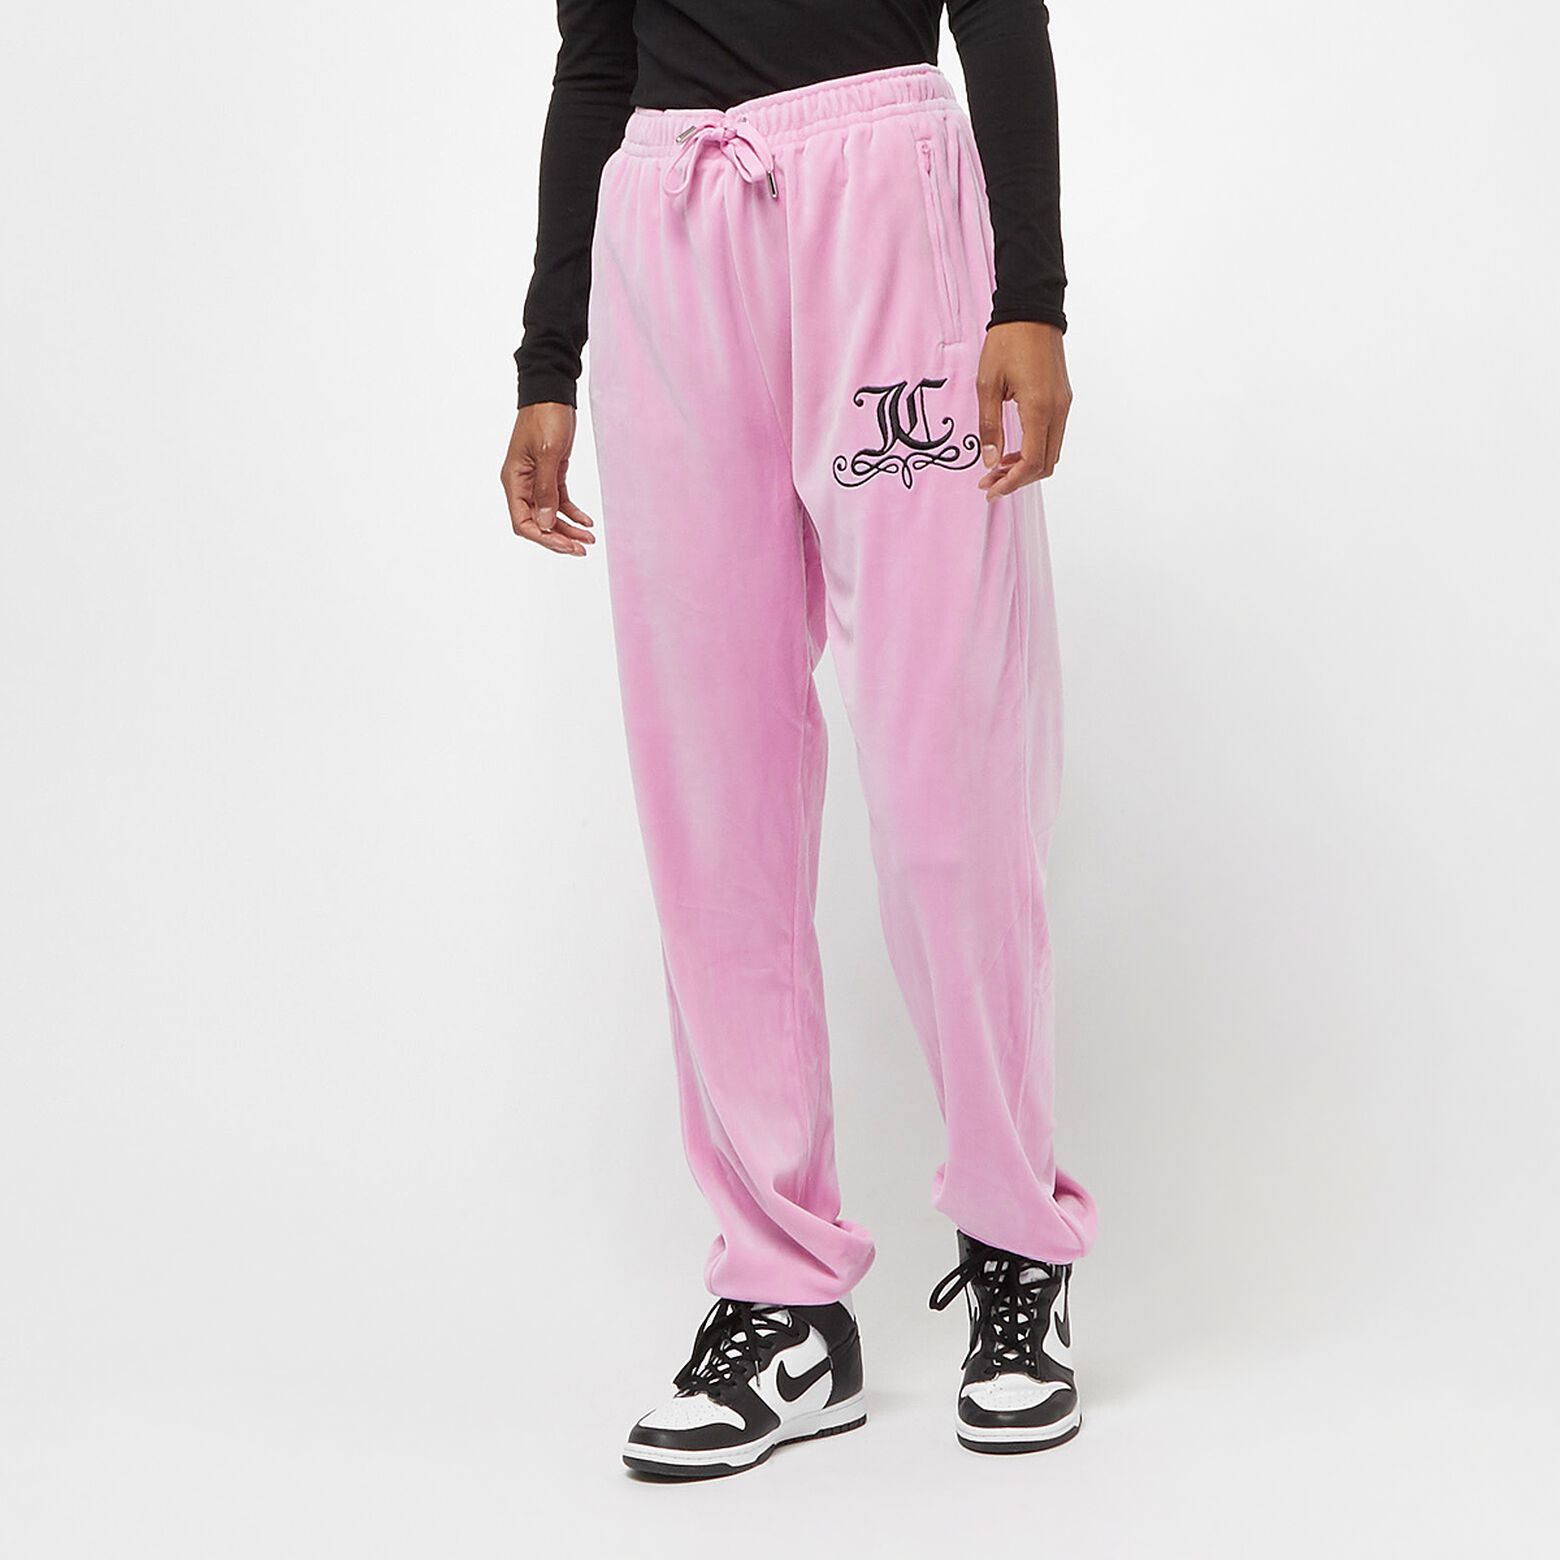 Juicy Couture Lilian Crest Joggers